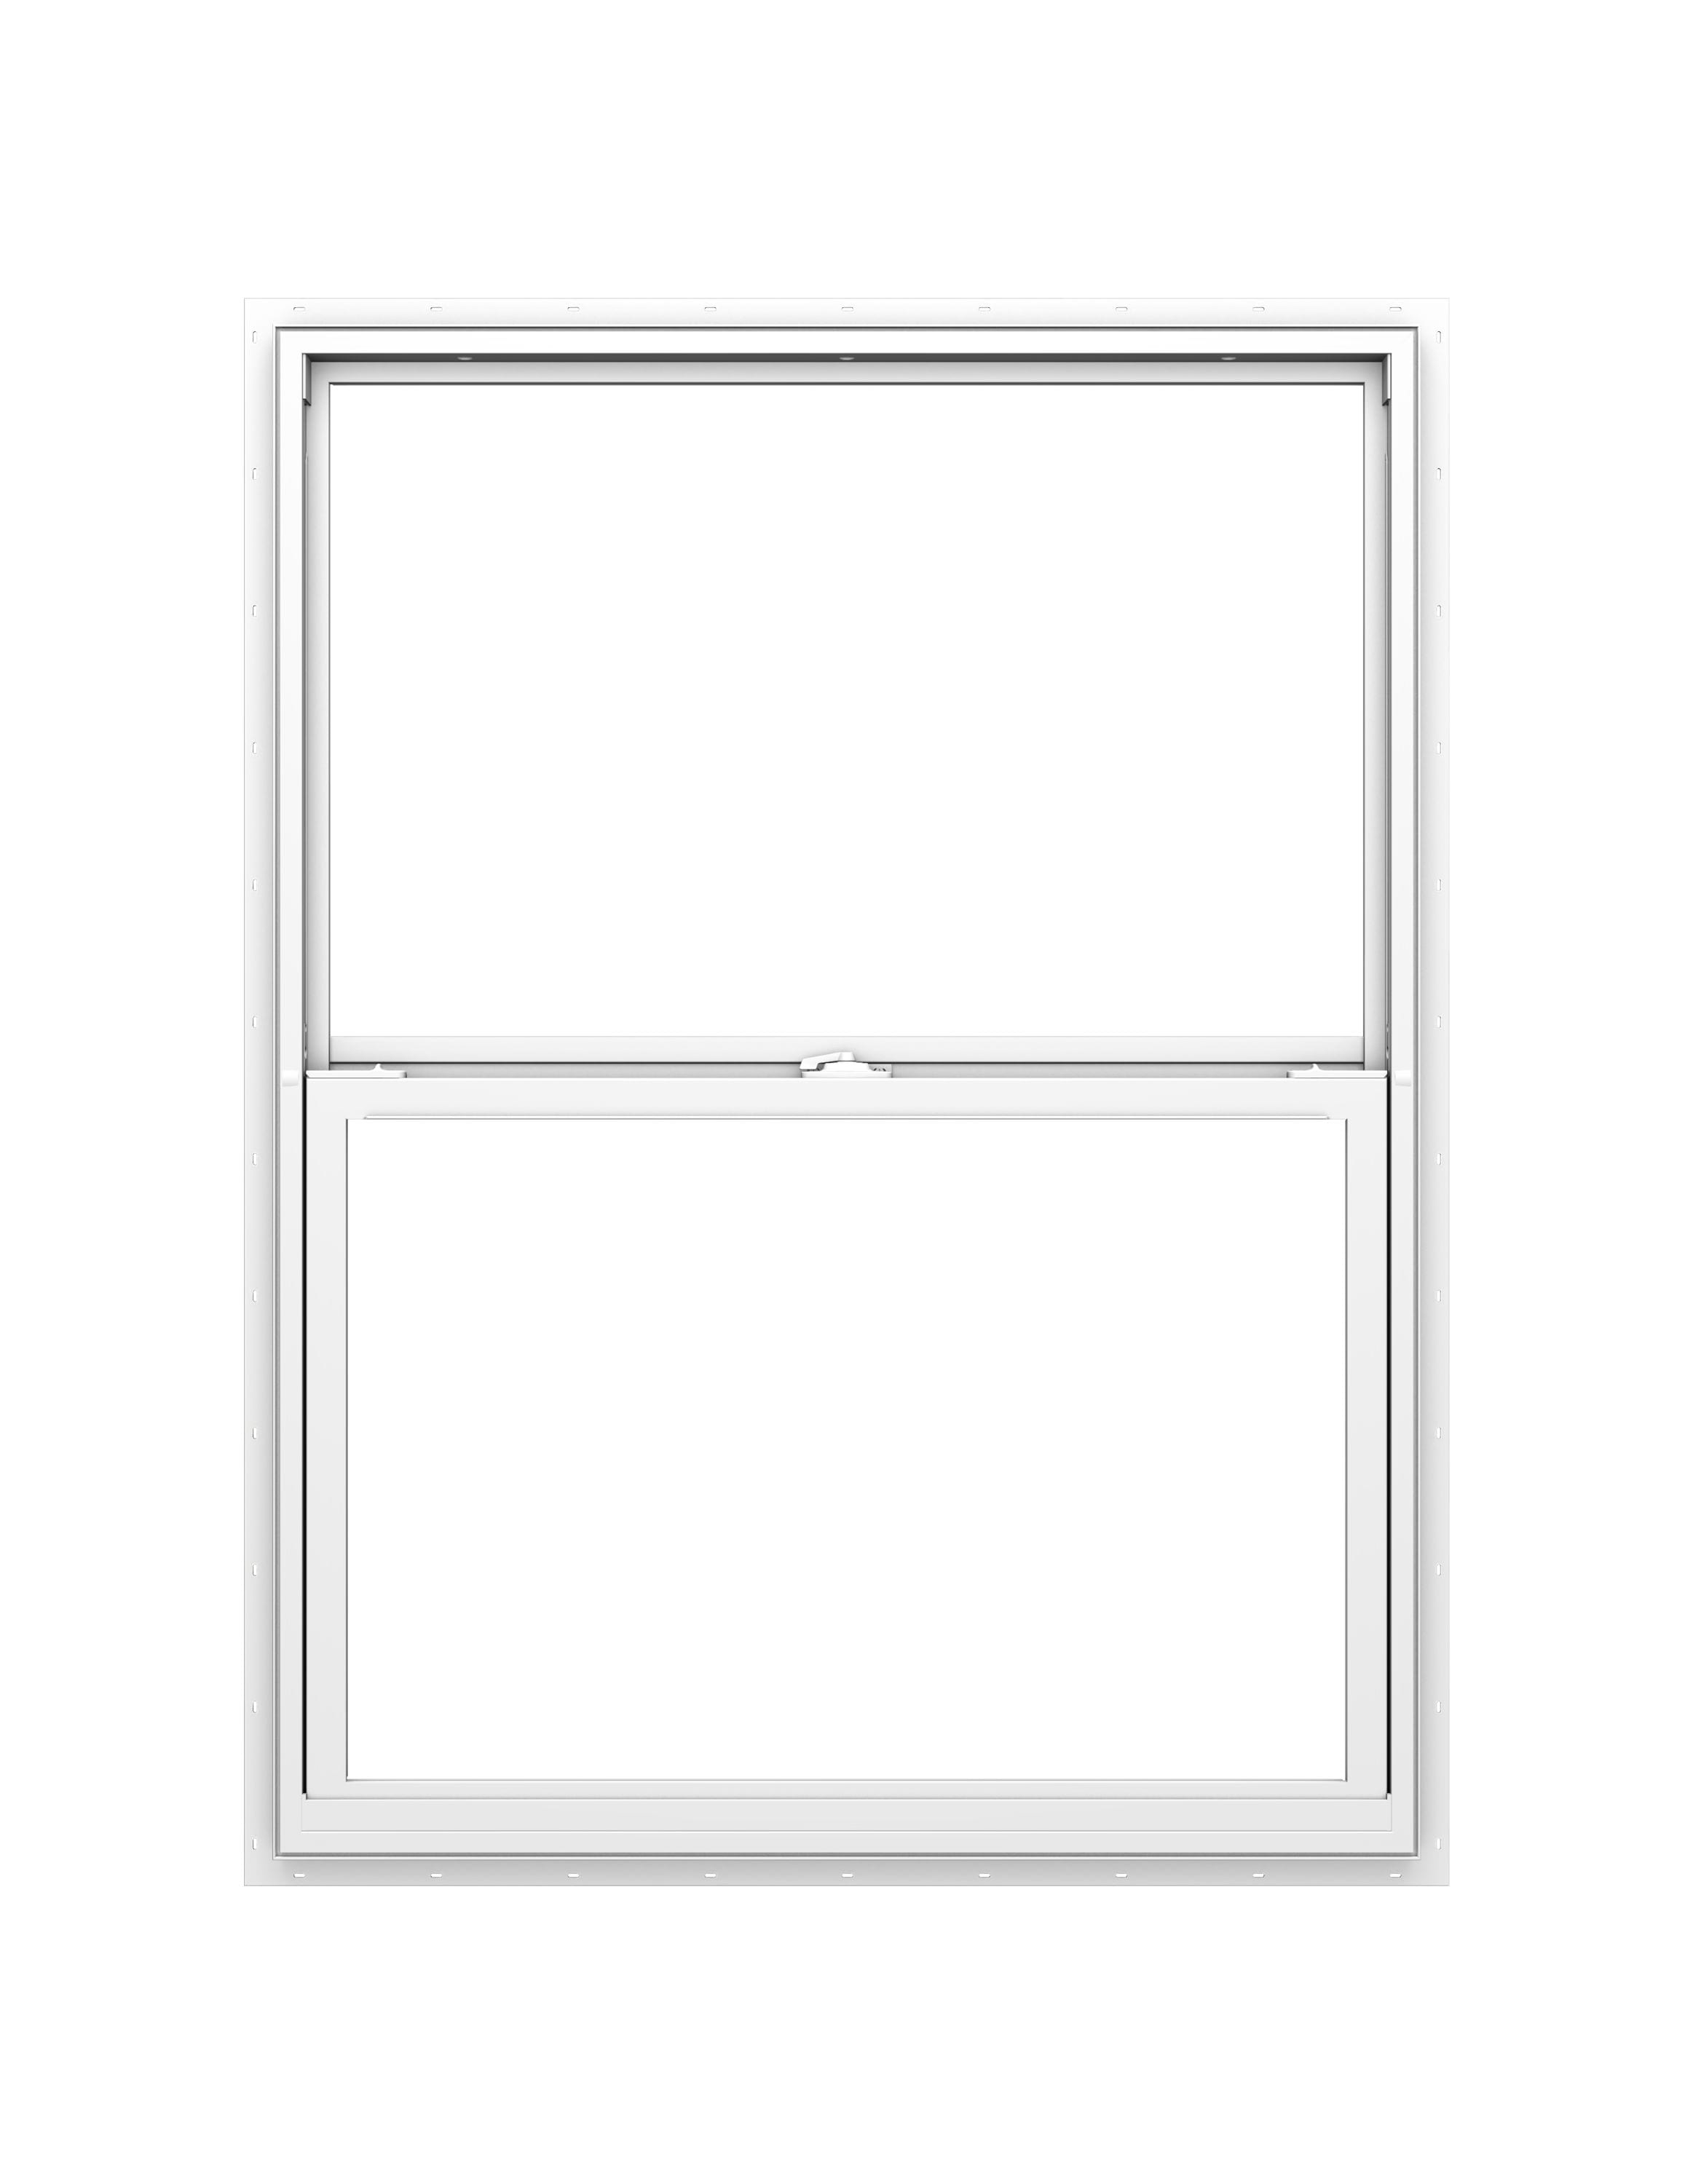 150 Series New Construction 23.5-in x 35.5-in x 2.6875-in Jamb White Vinyl Dual-pane Single Hung Window Half Screen Included | - Pella 1000009512